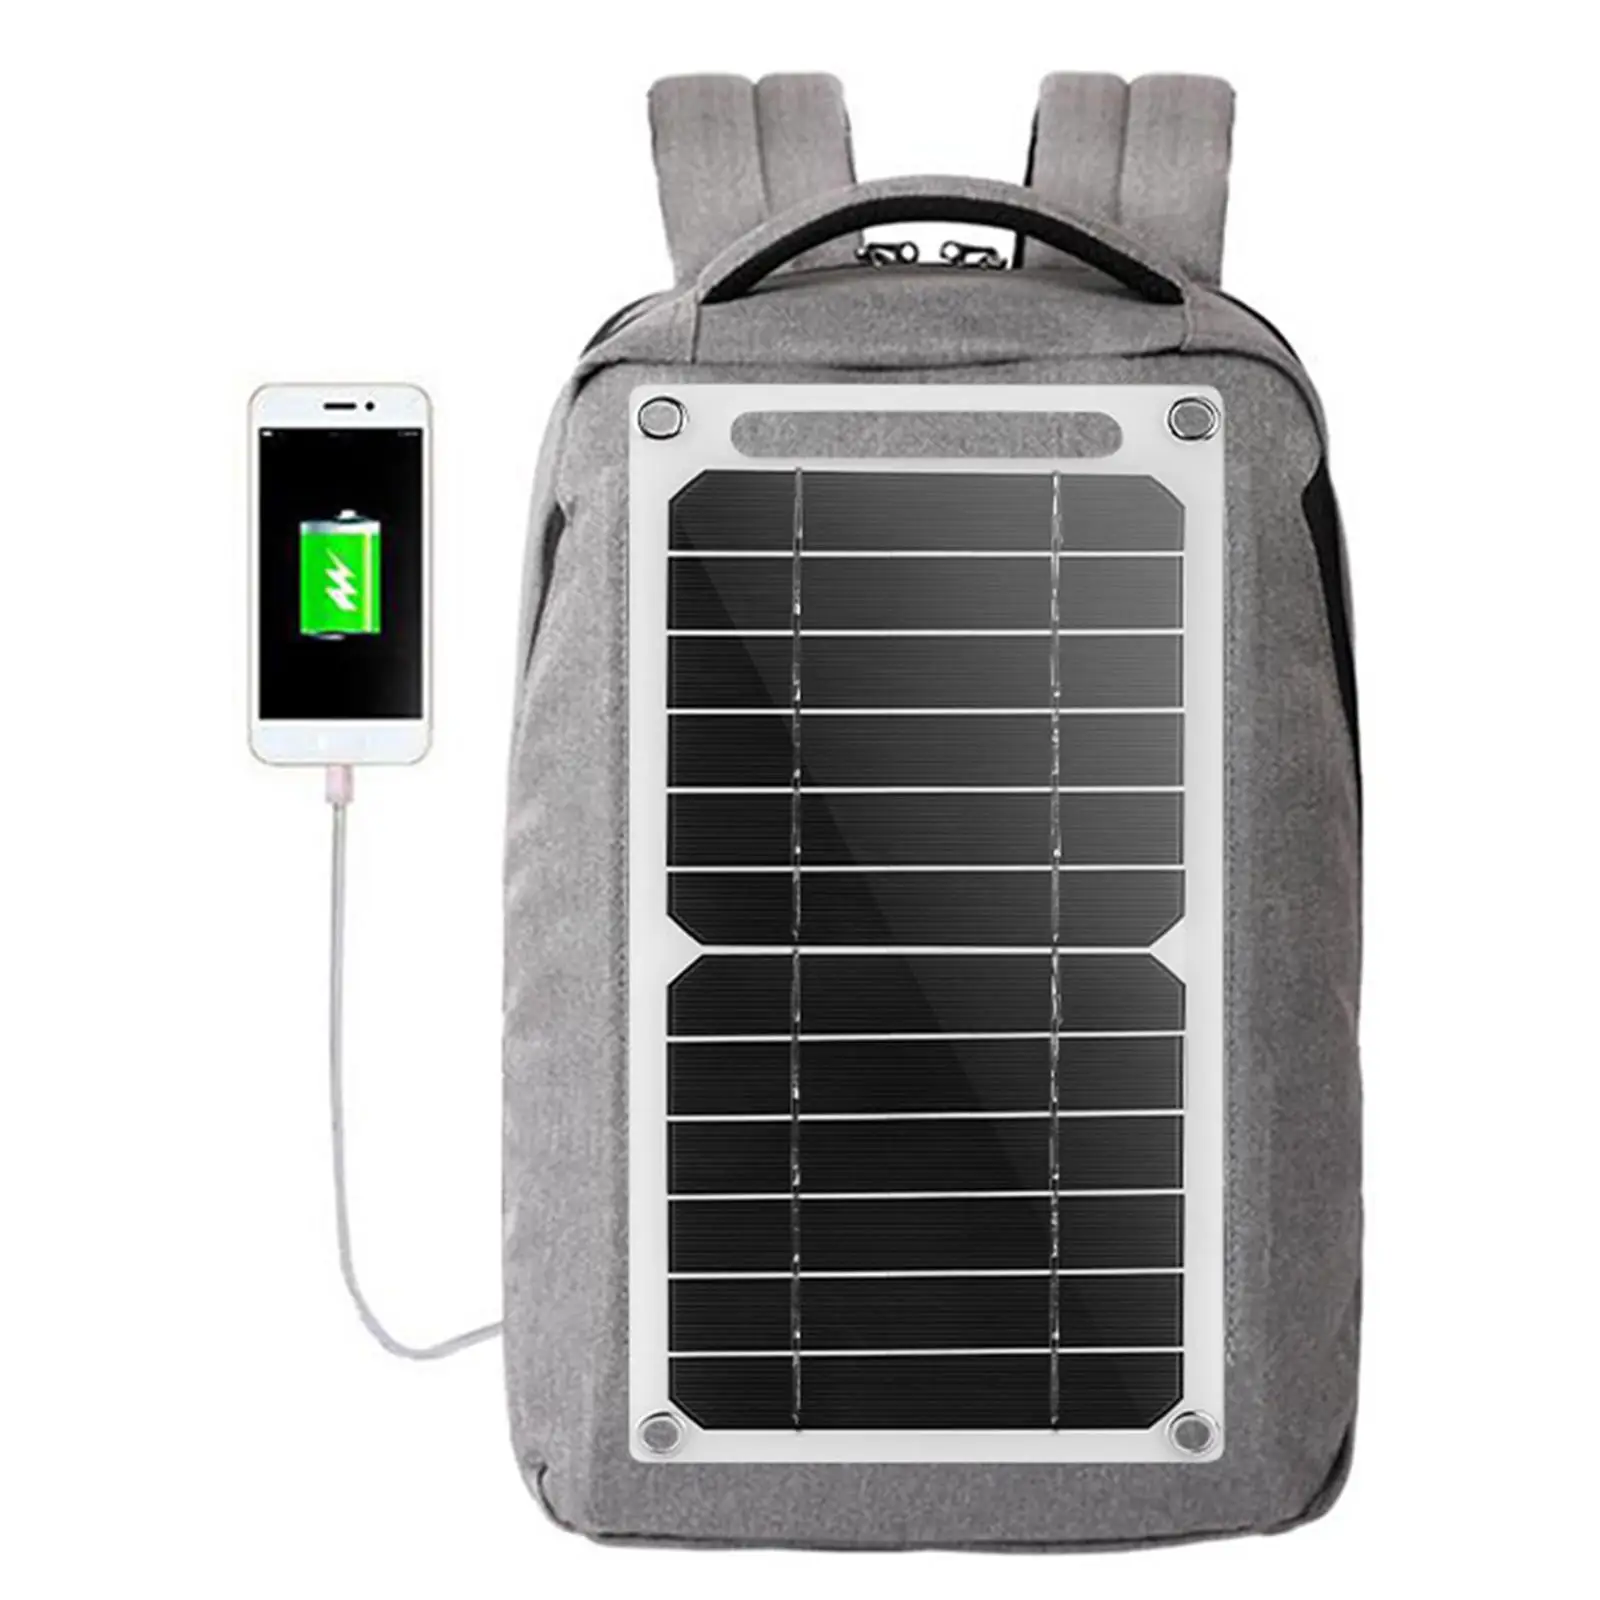 5V 6W Solar Panel Battery Charger USB Port Trickle Charge Monocrystalline for Cell Phone Backpacking Travel Camping Outdoor